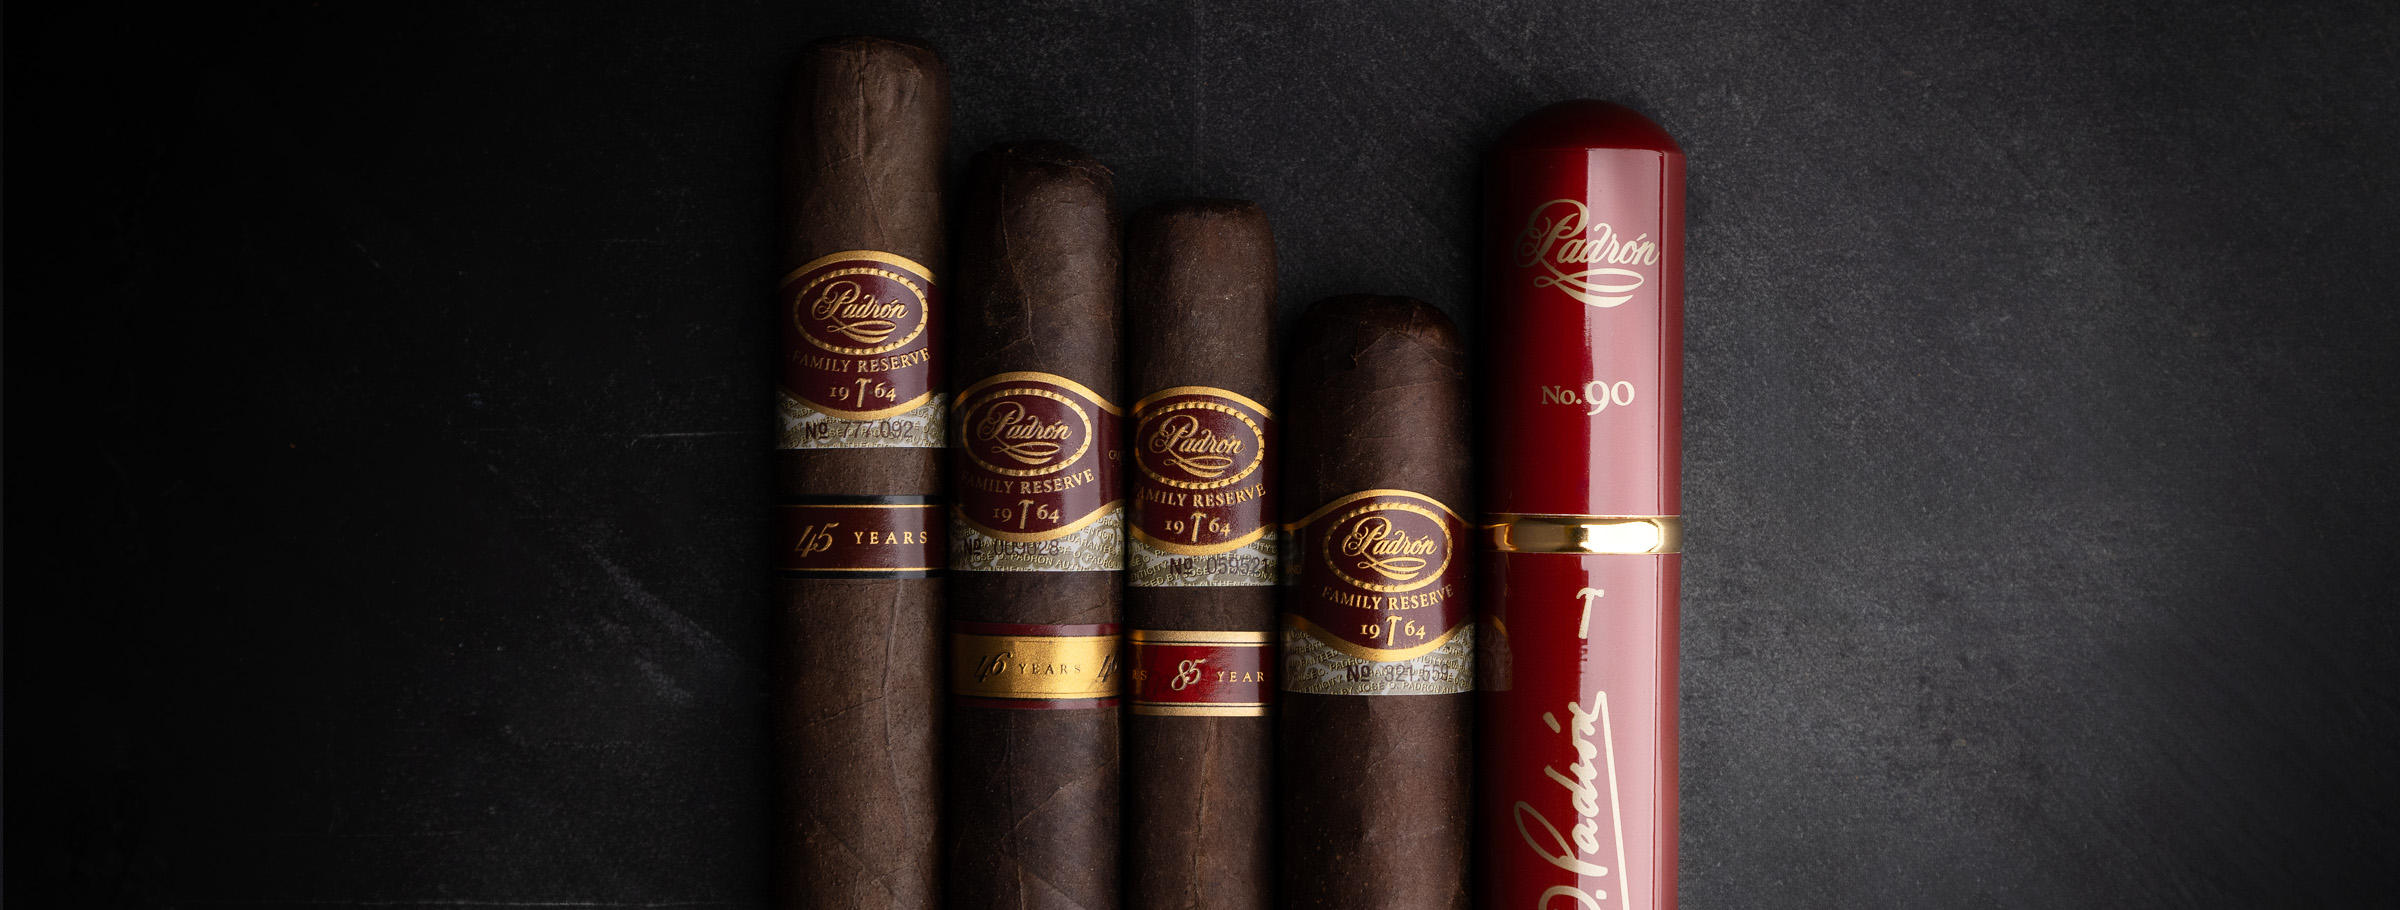 padron-family-reserve-cigars